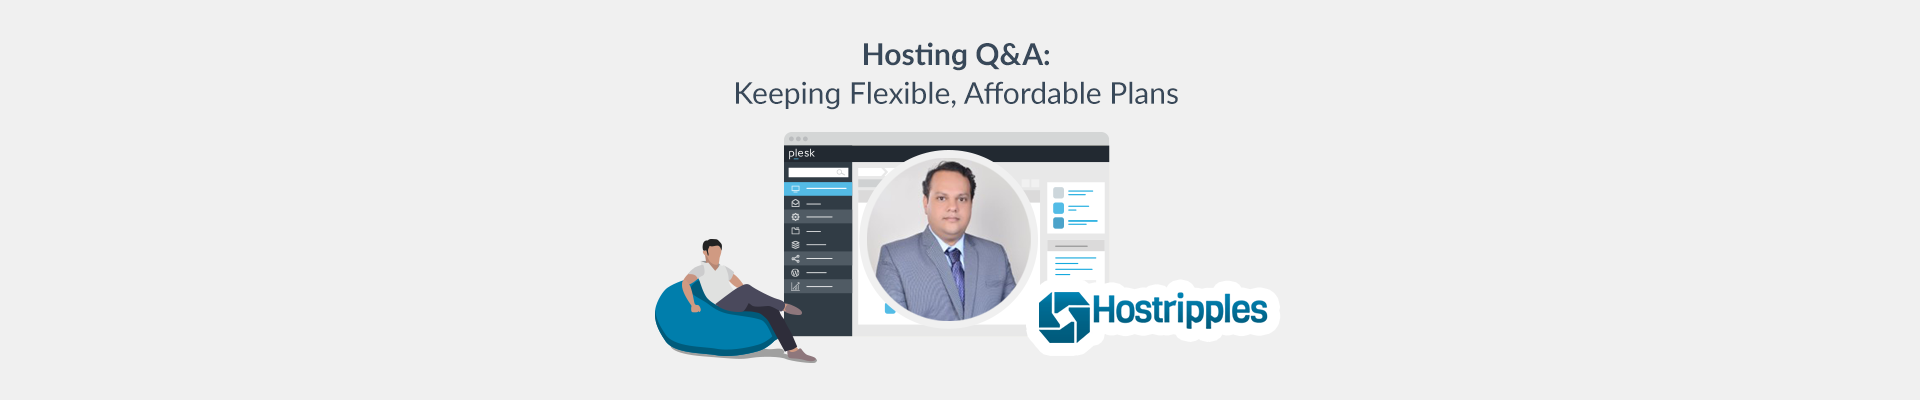 Hostripples Q&A: Keeping Affordable, Flexible Hosting Plans and More - Plesk Partners